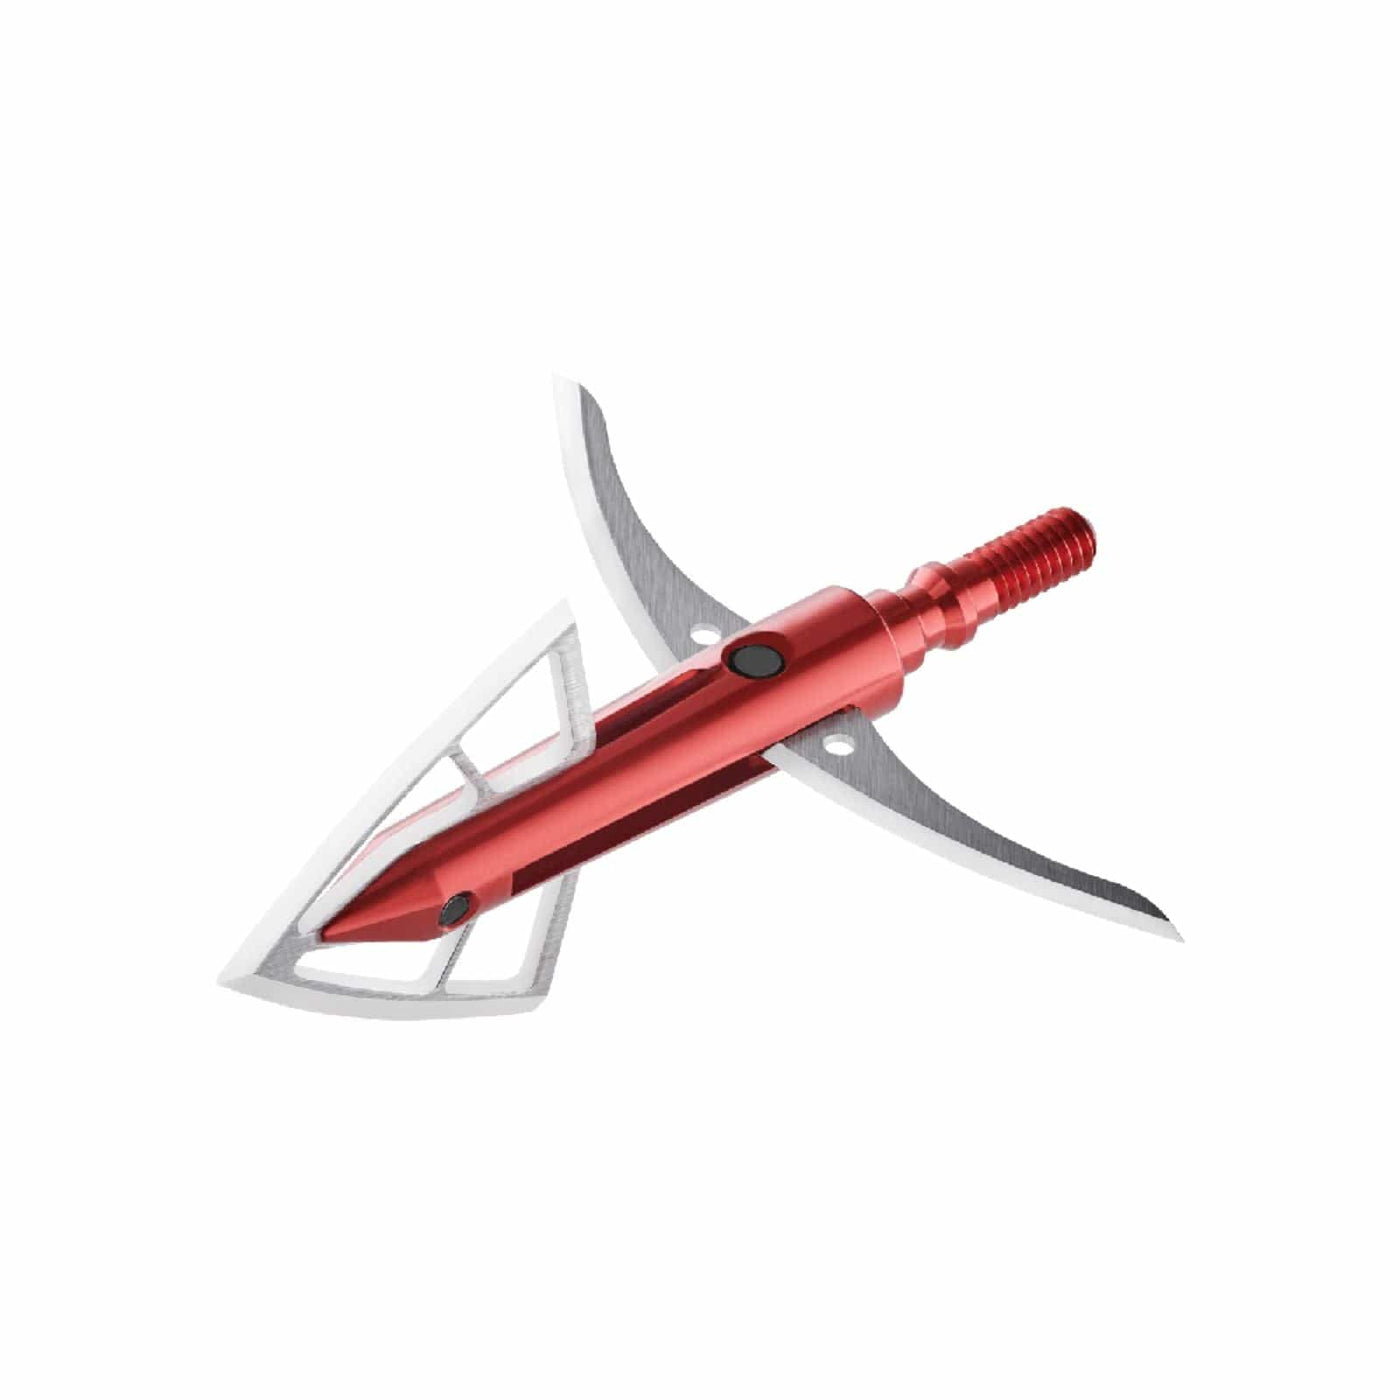 Bloodsport Bloodsport Grave Digger Extreme Broadheads Cut On Contact 100 Gr. 3 Pk. Archery